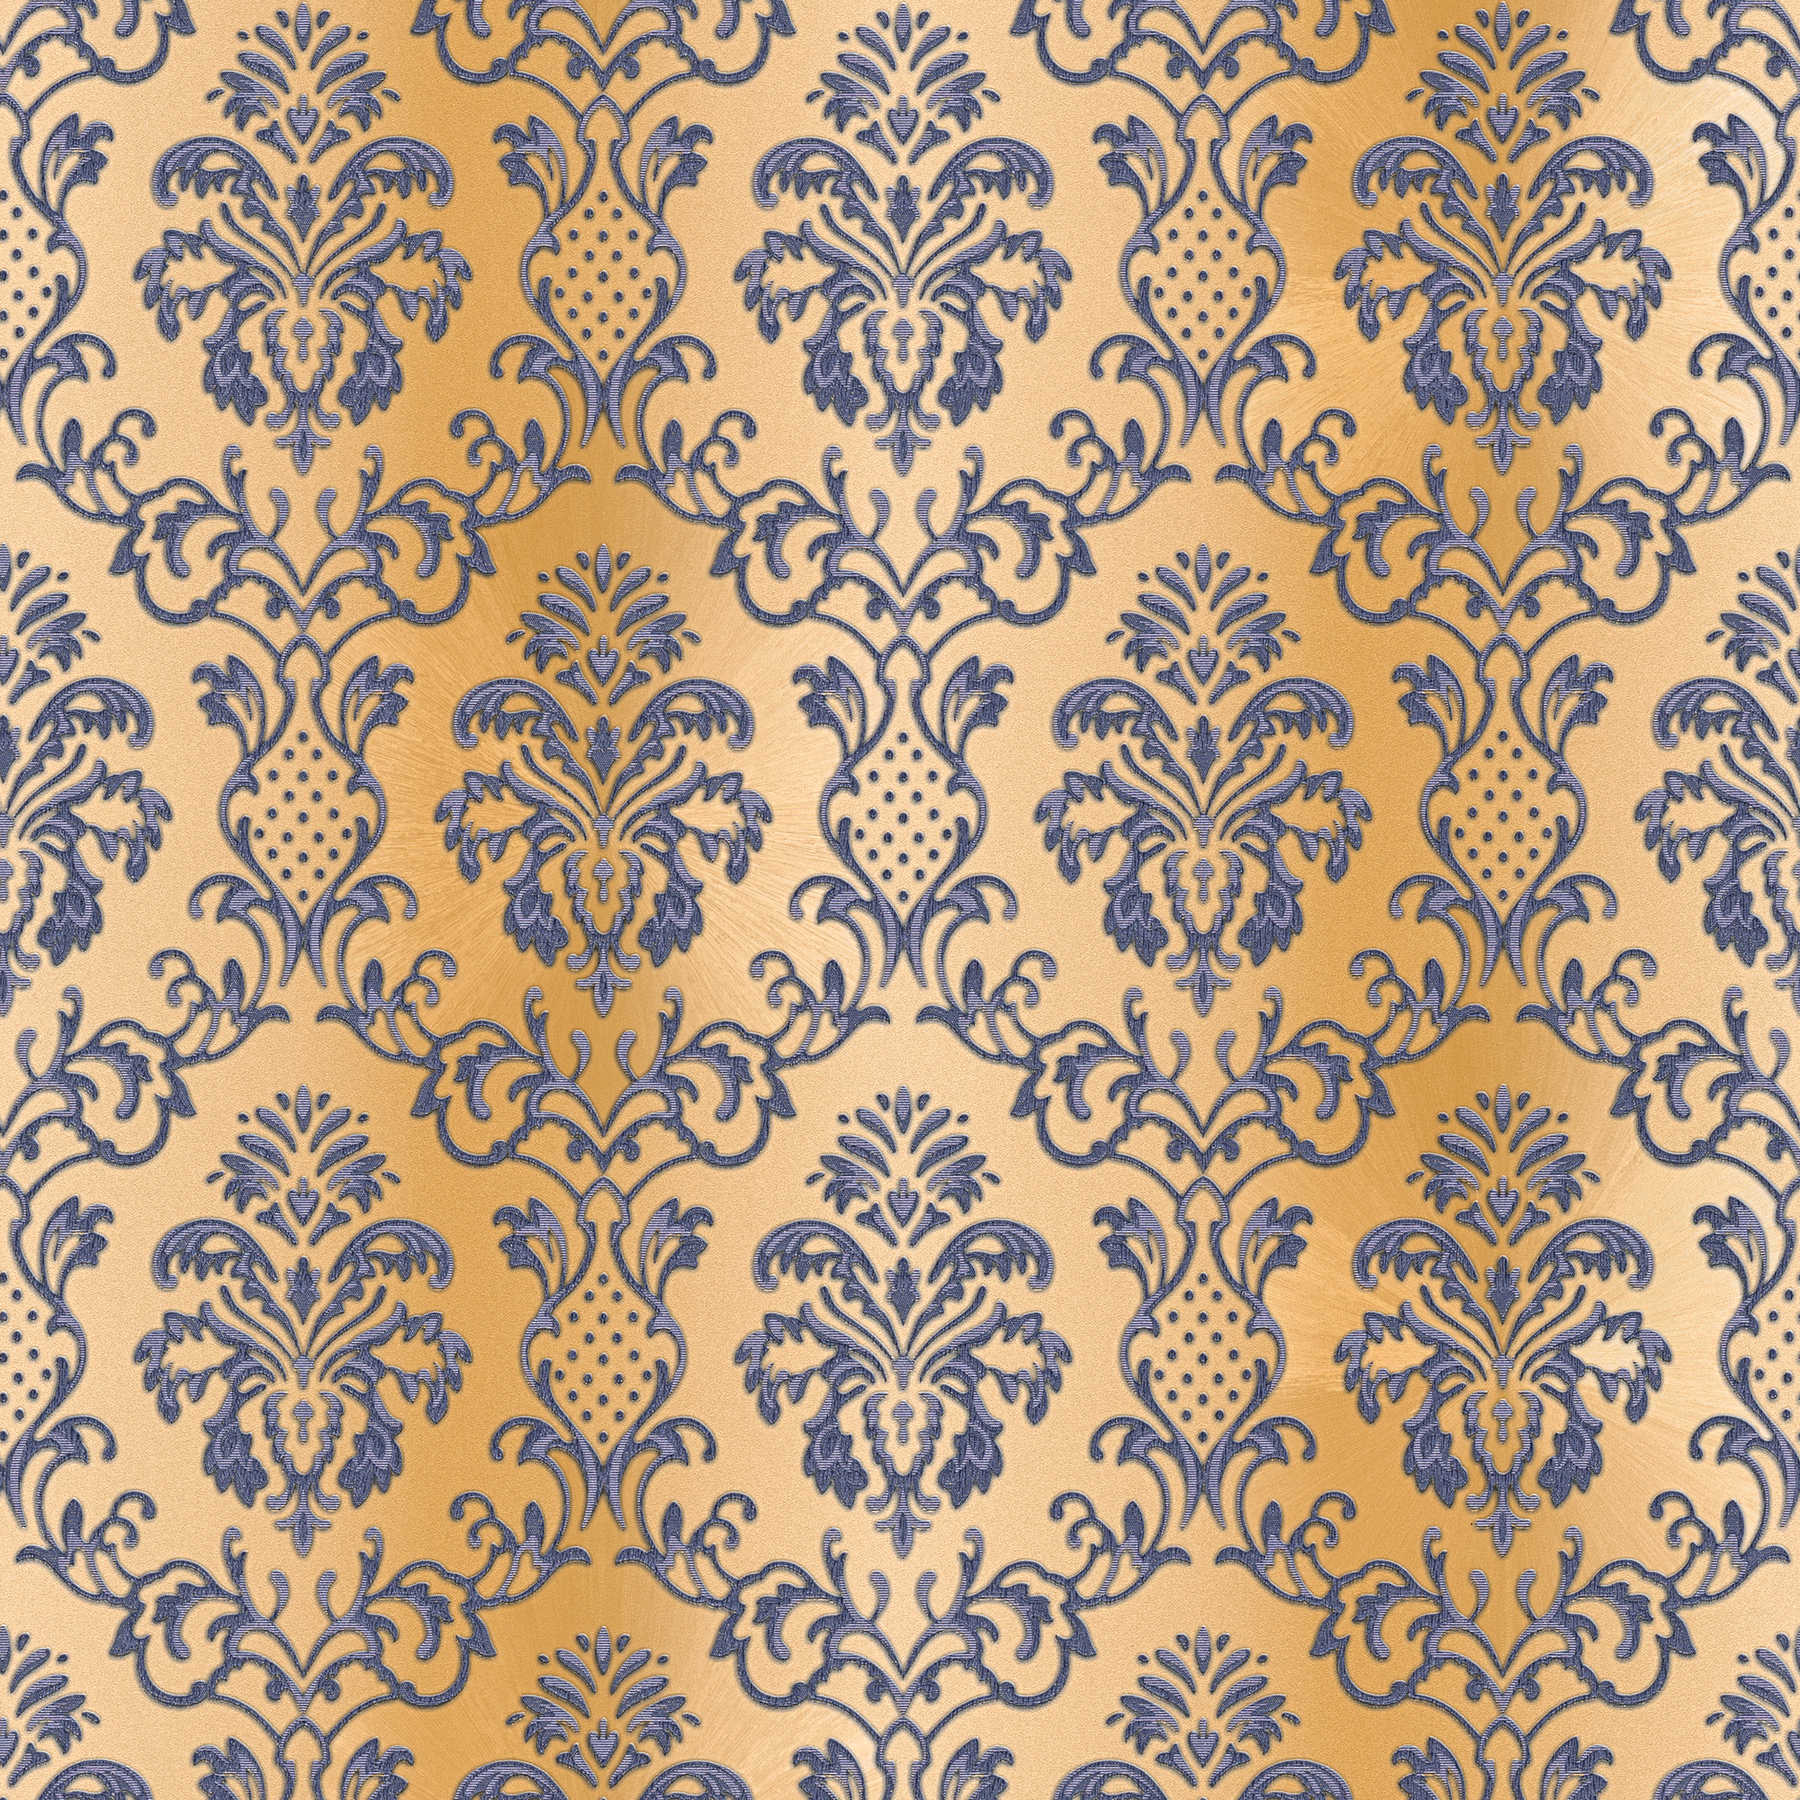 Ornament wallpaper with metallic effect - blue, brown
